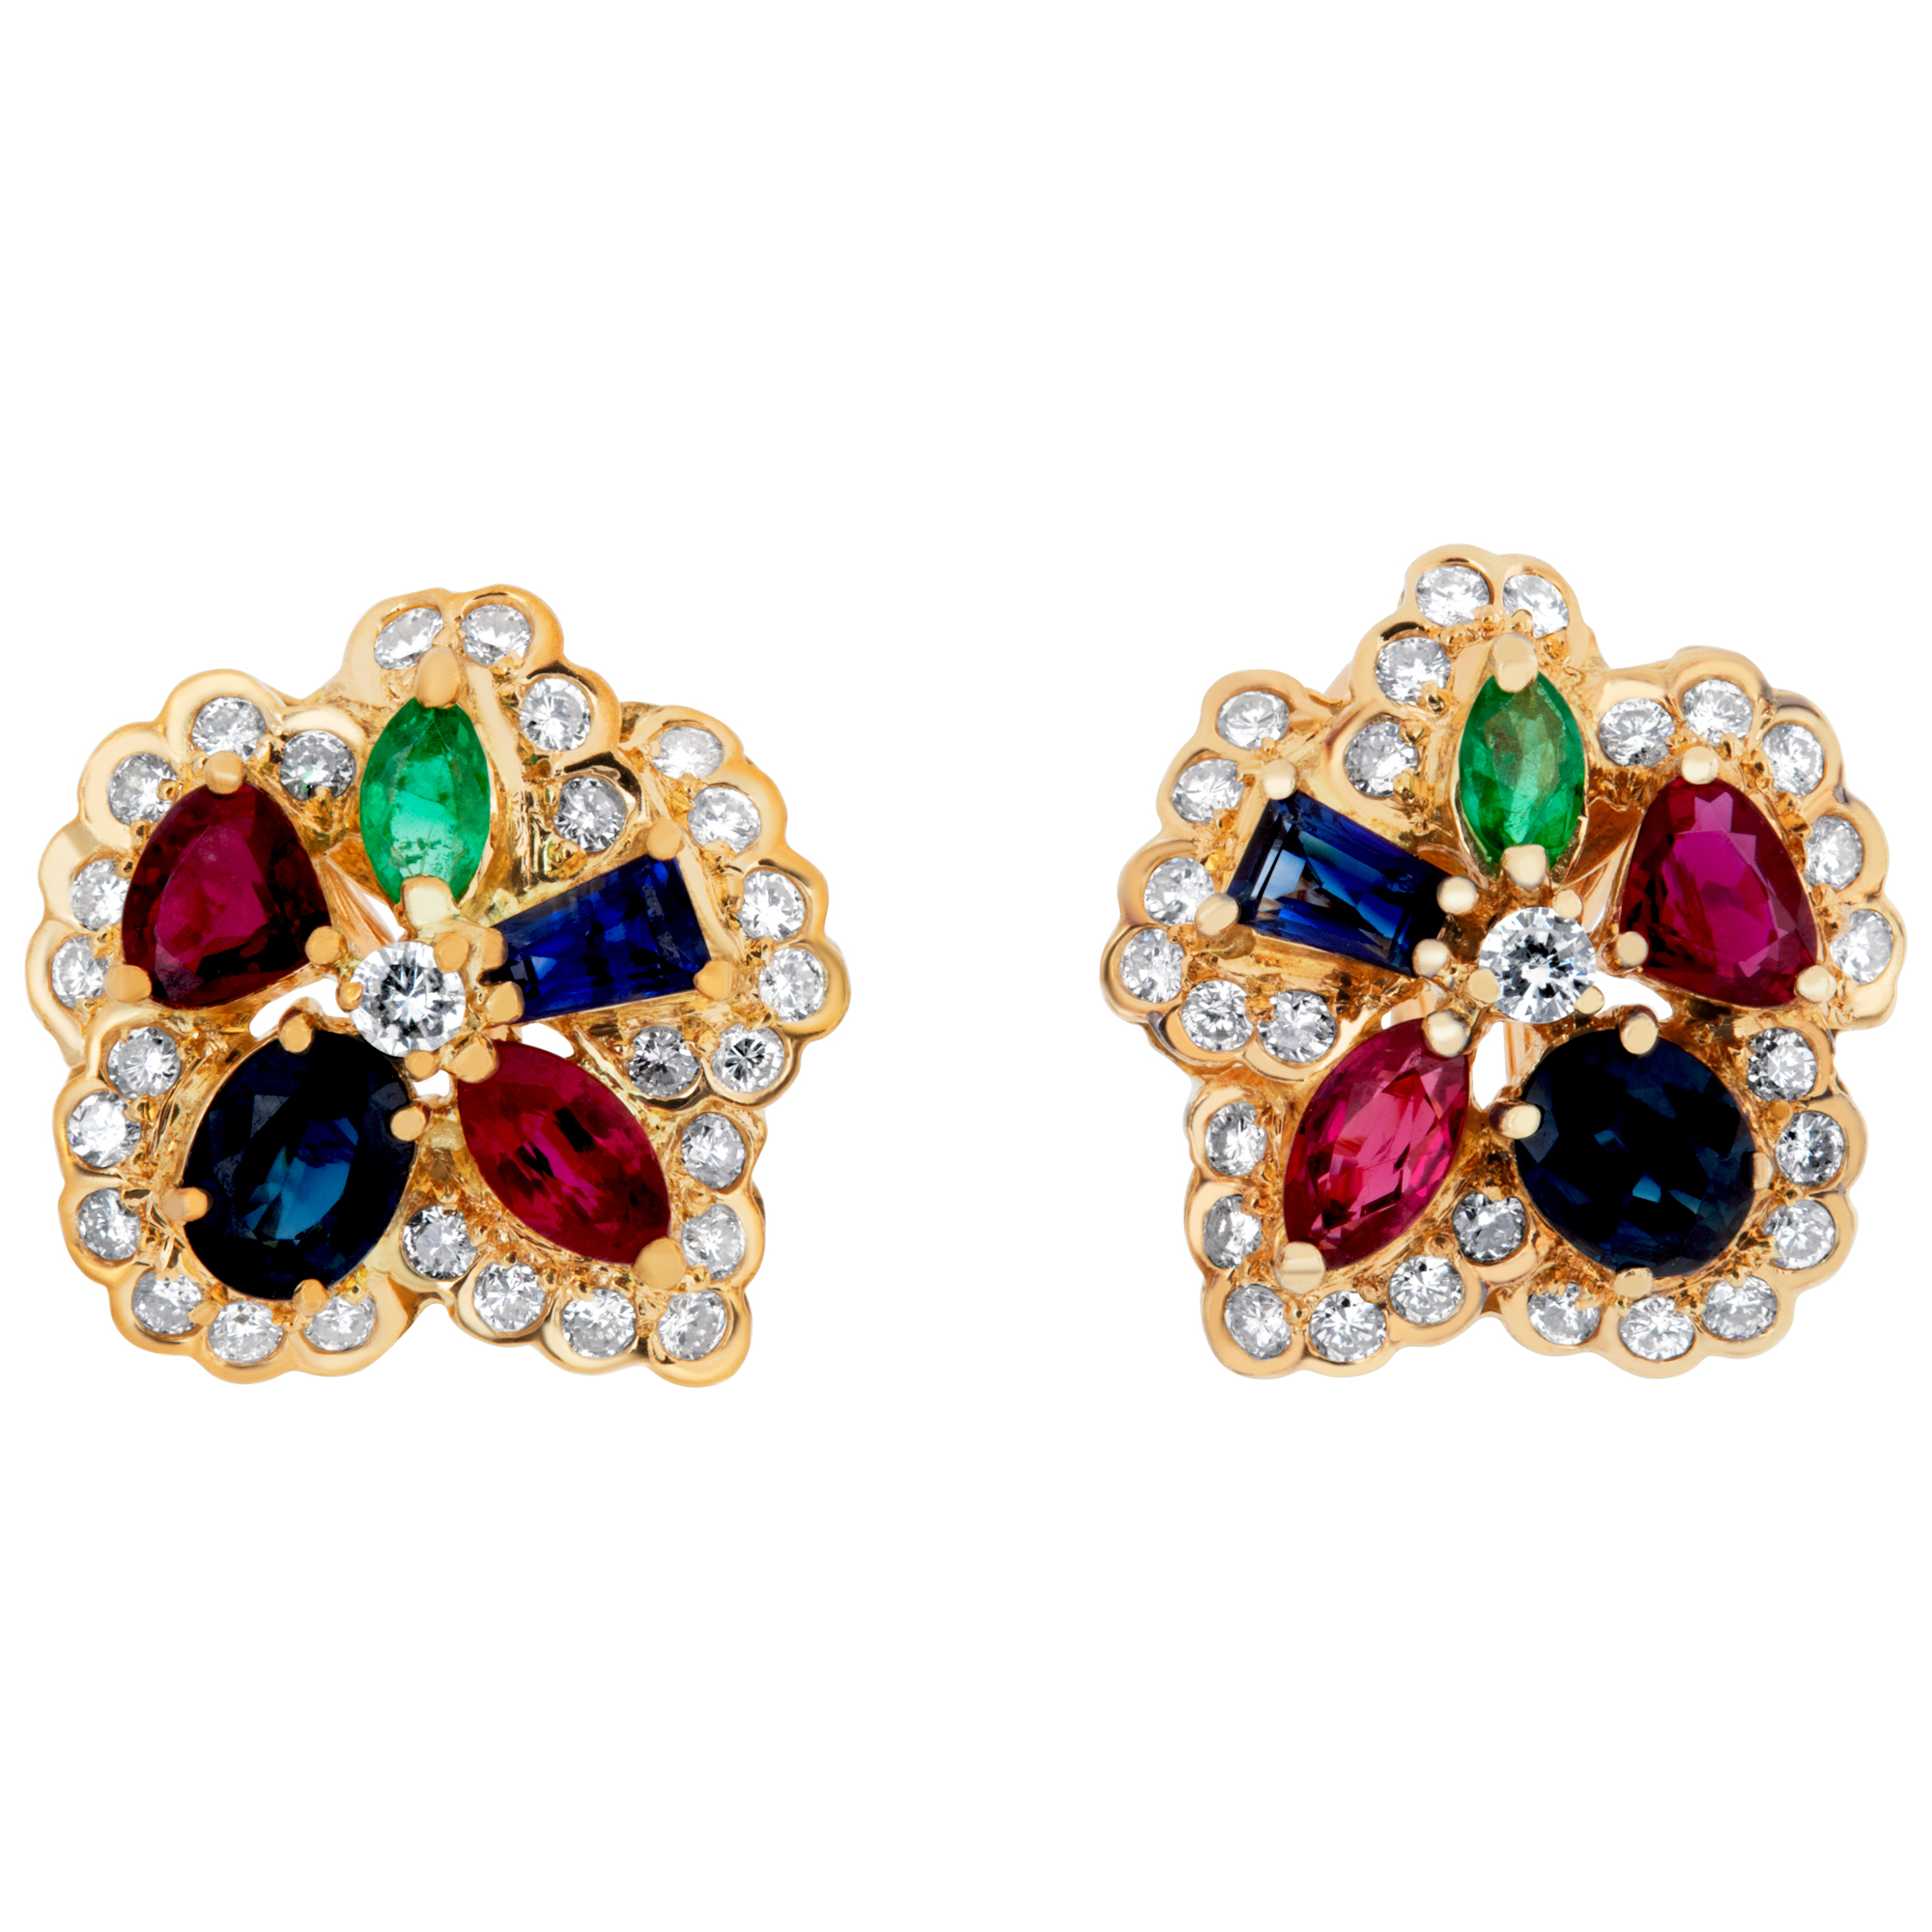 Sapphire, Ruby and Emerald cluster earrings with diamond accents image 1